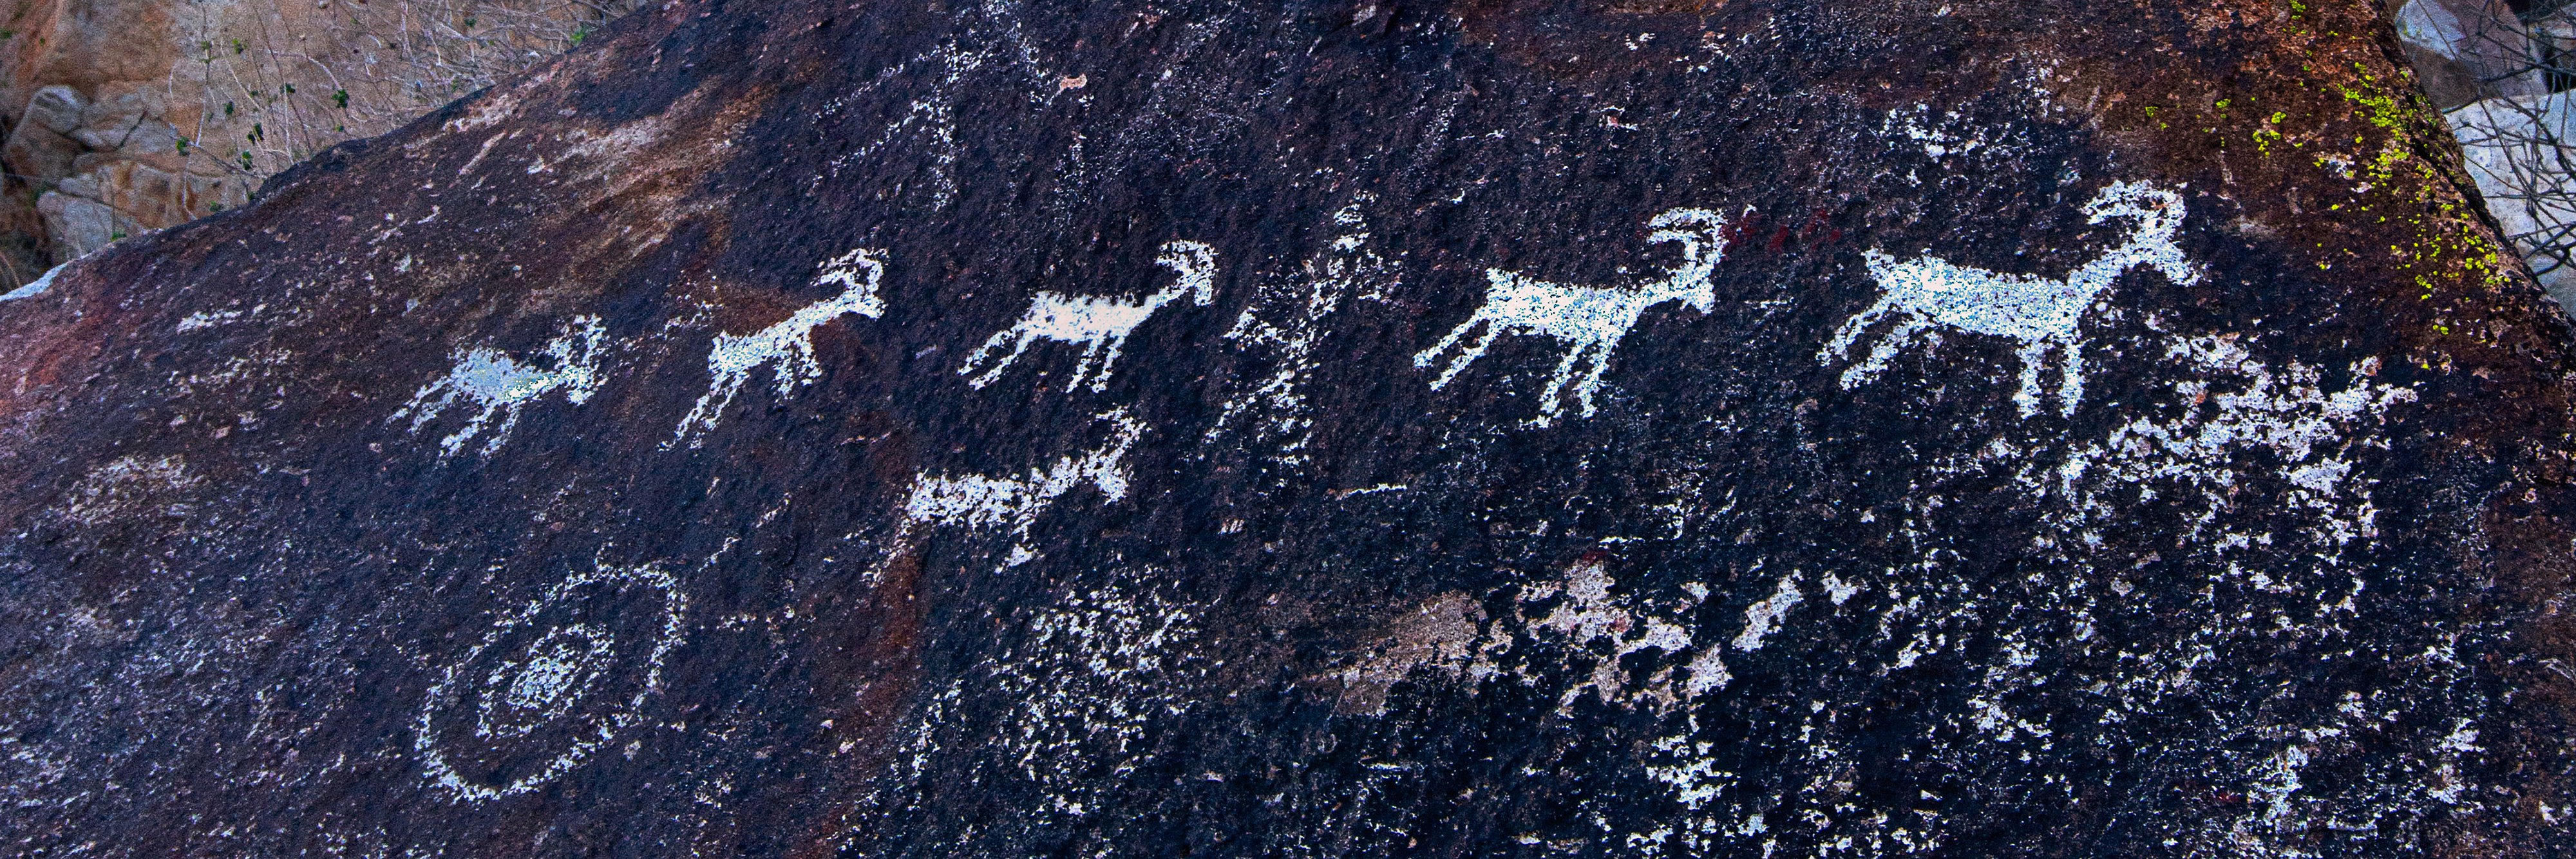 petroglyphs showing shepard and sheep from Grapevine Canyon, NV USA